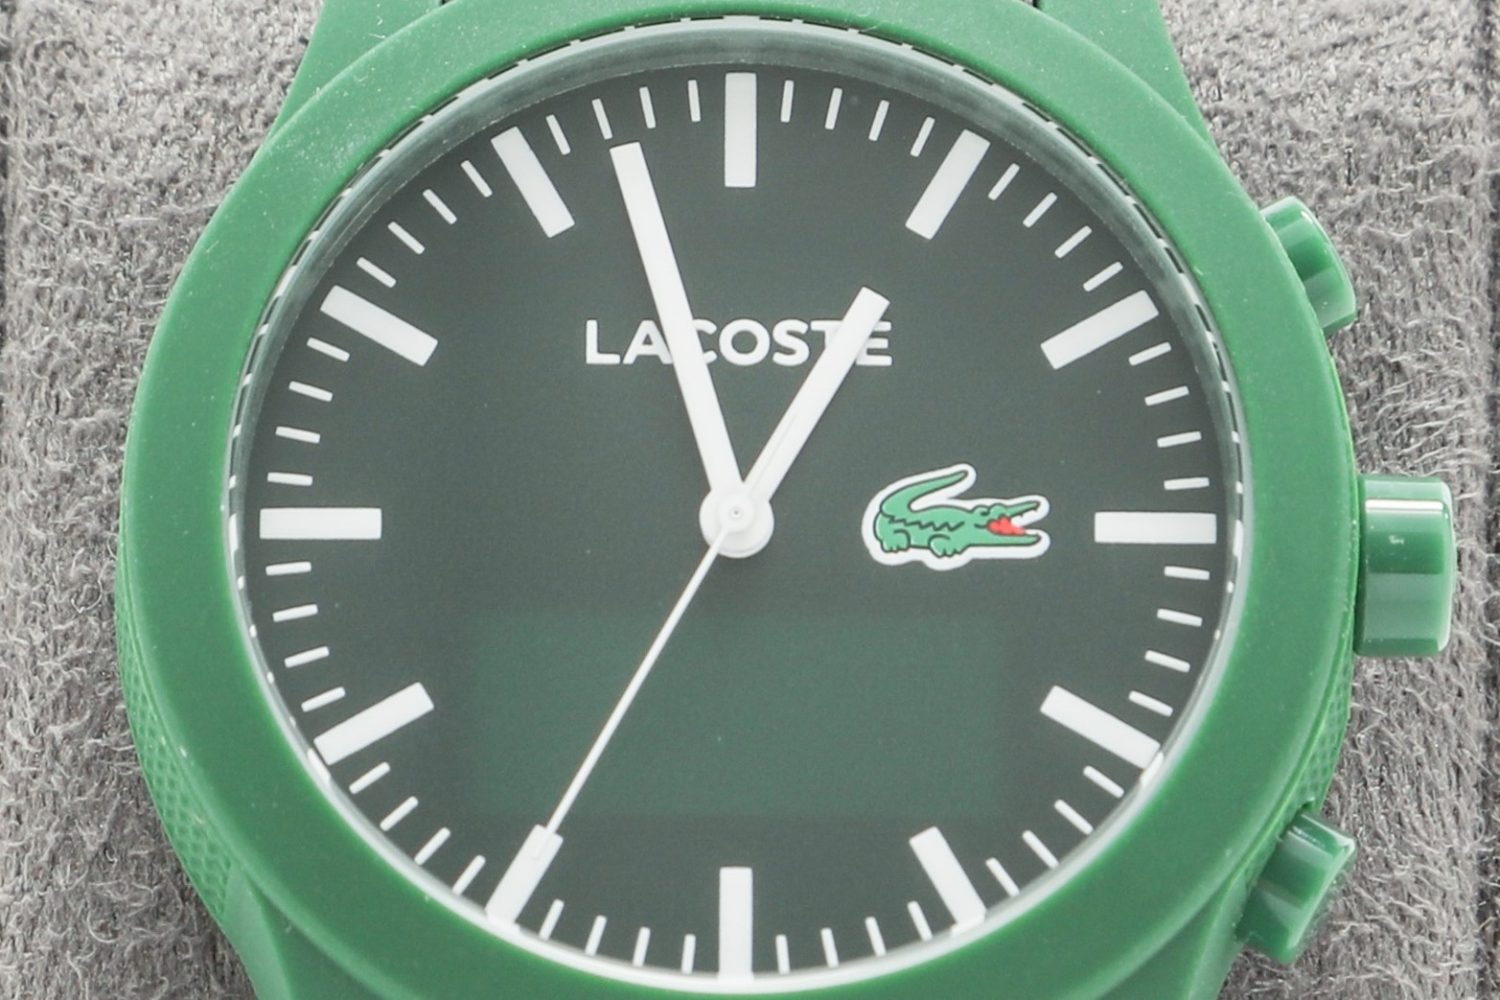 Green smartwatch created by Lacoste in collaboration with Hewlett-Packard.